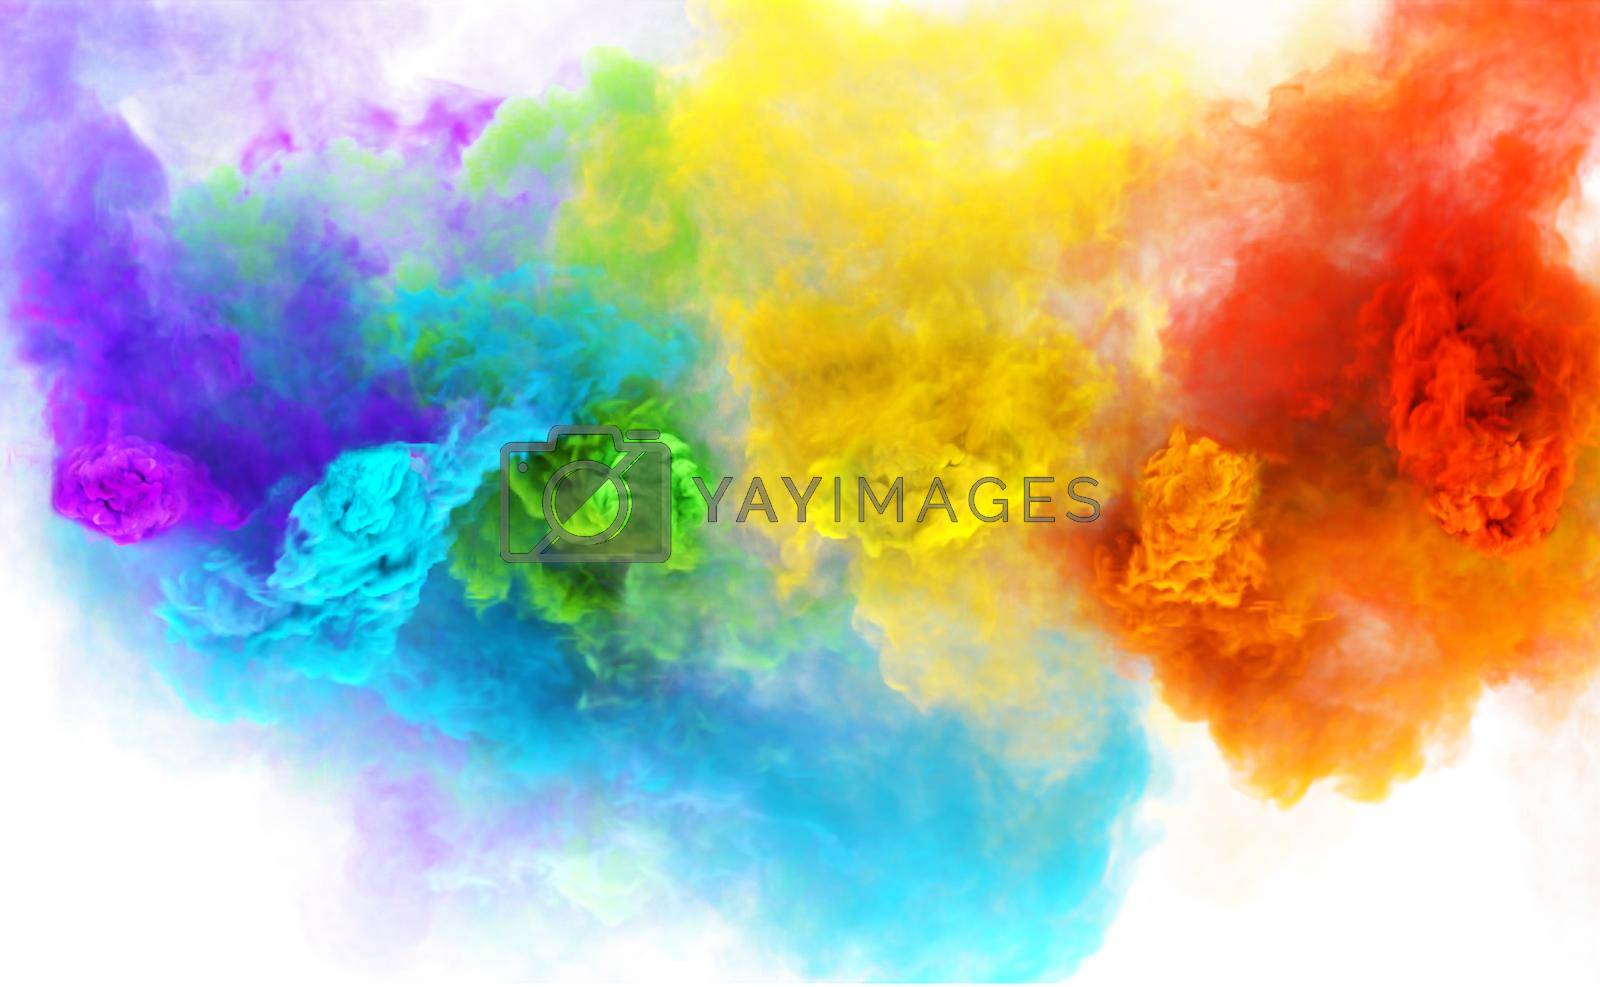 Royalty free image of Rainbow smoke clouds abstract heaven texture for background by Xeniasnowstorm